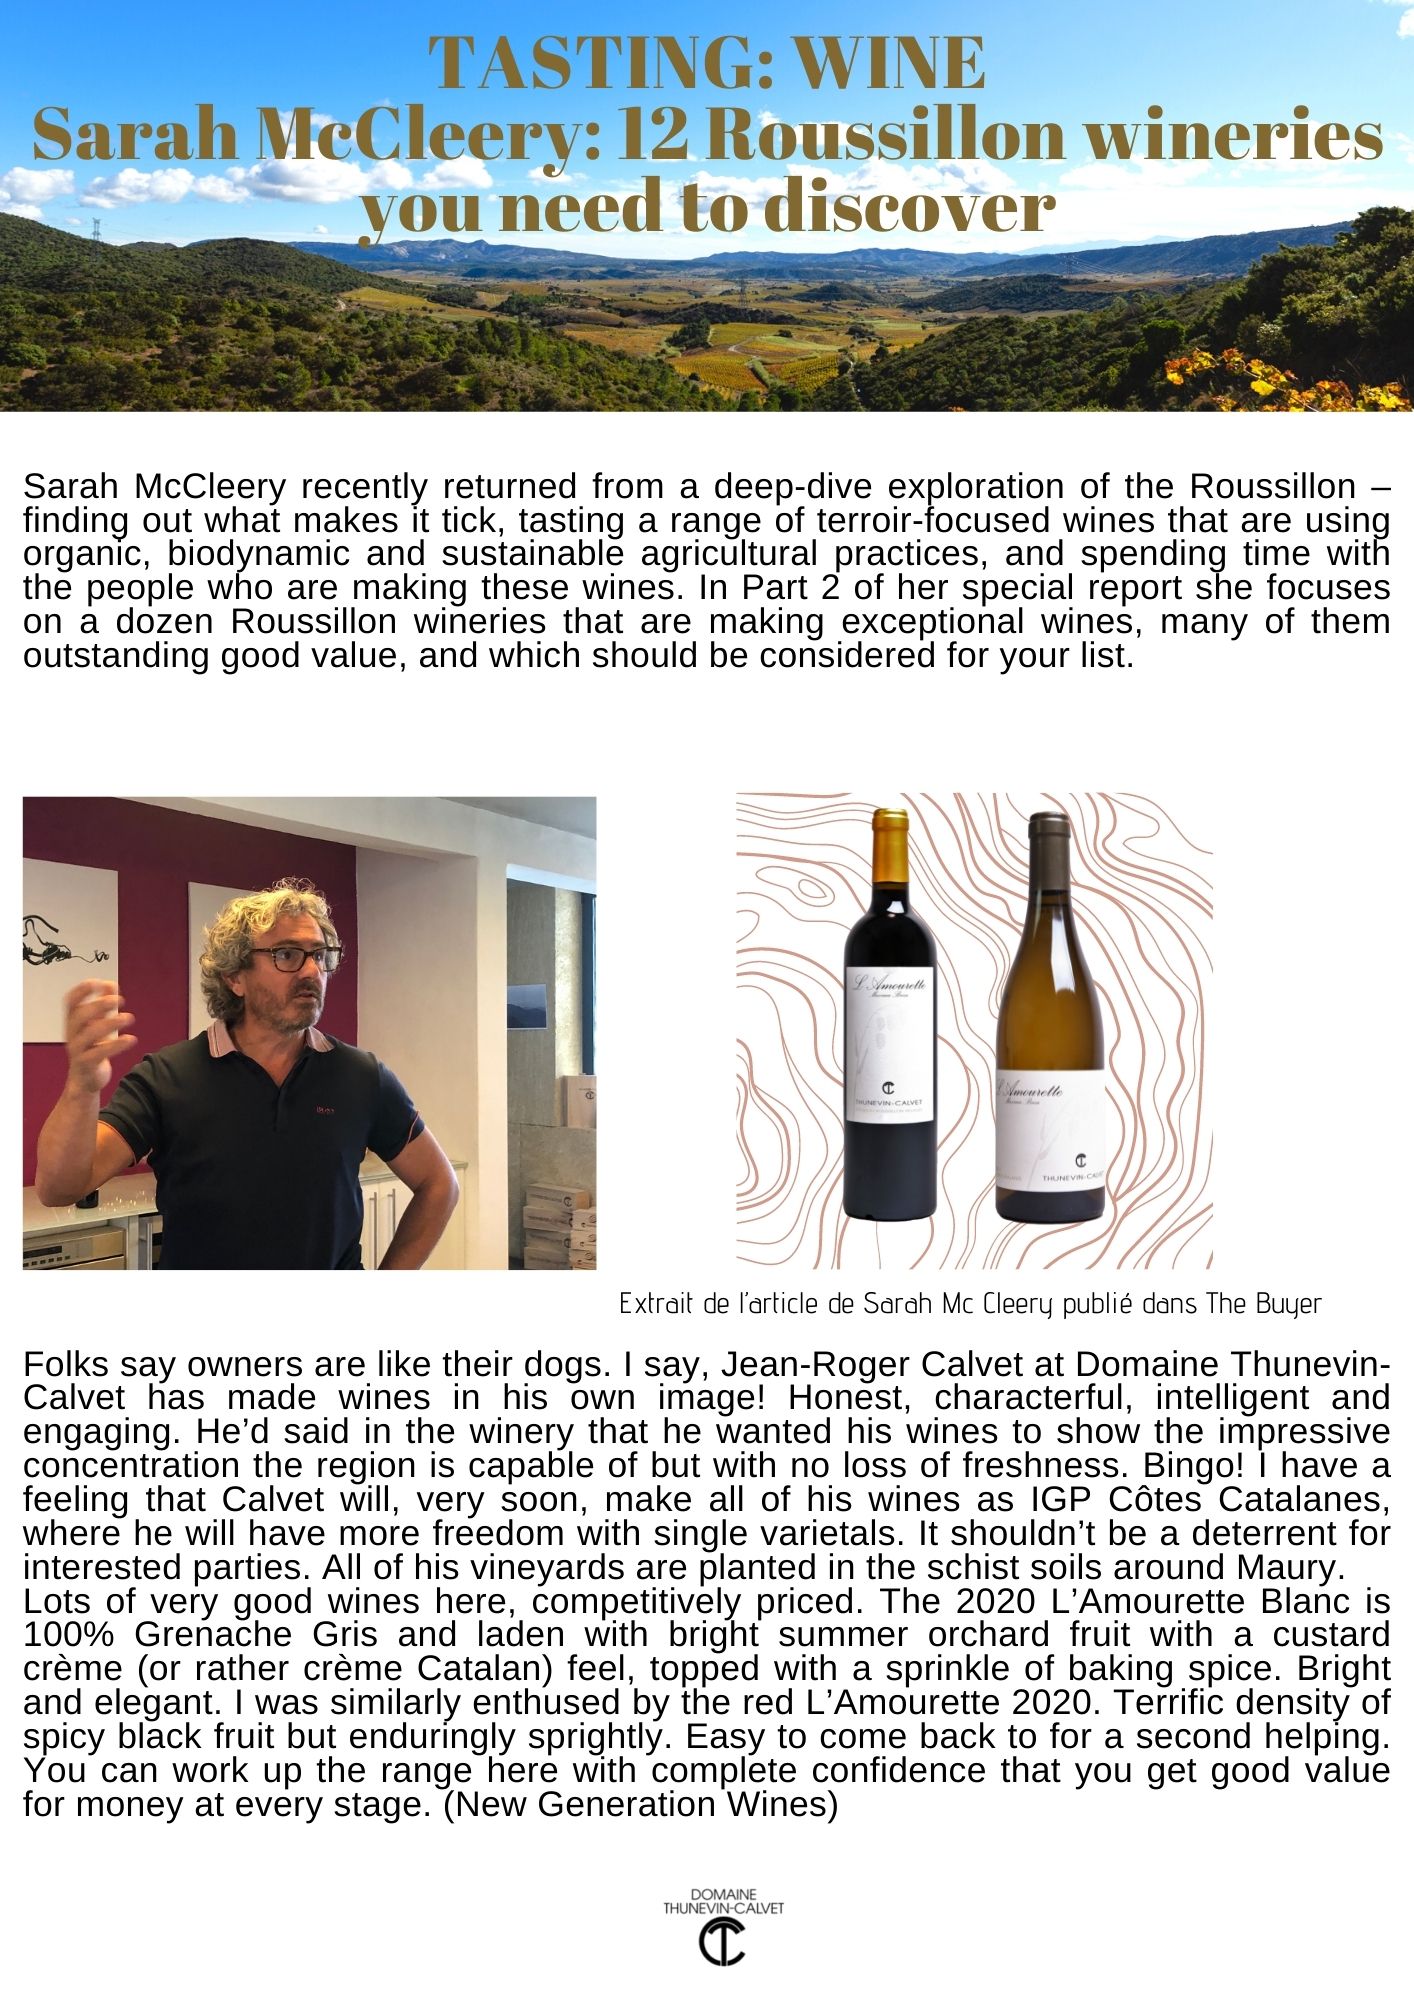 TASTING WINE Sarah McCleery 12 Roussillon wineries you need to discover